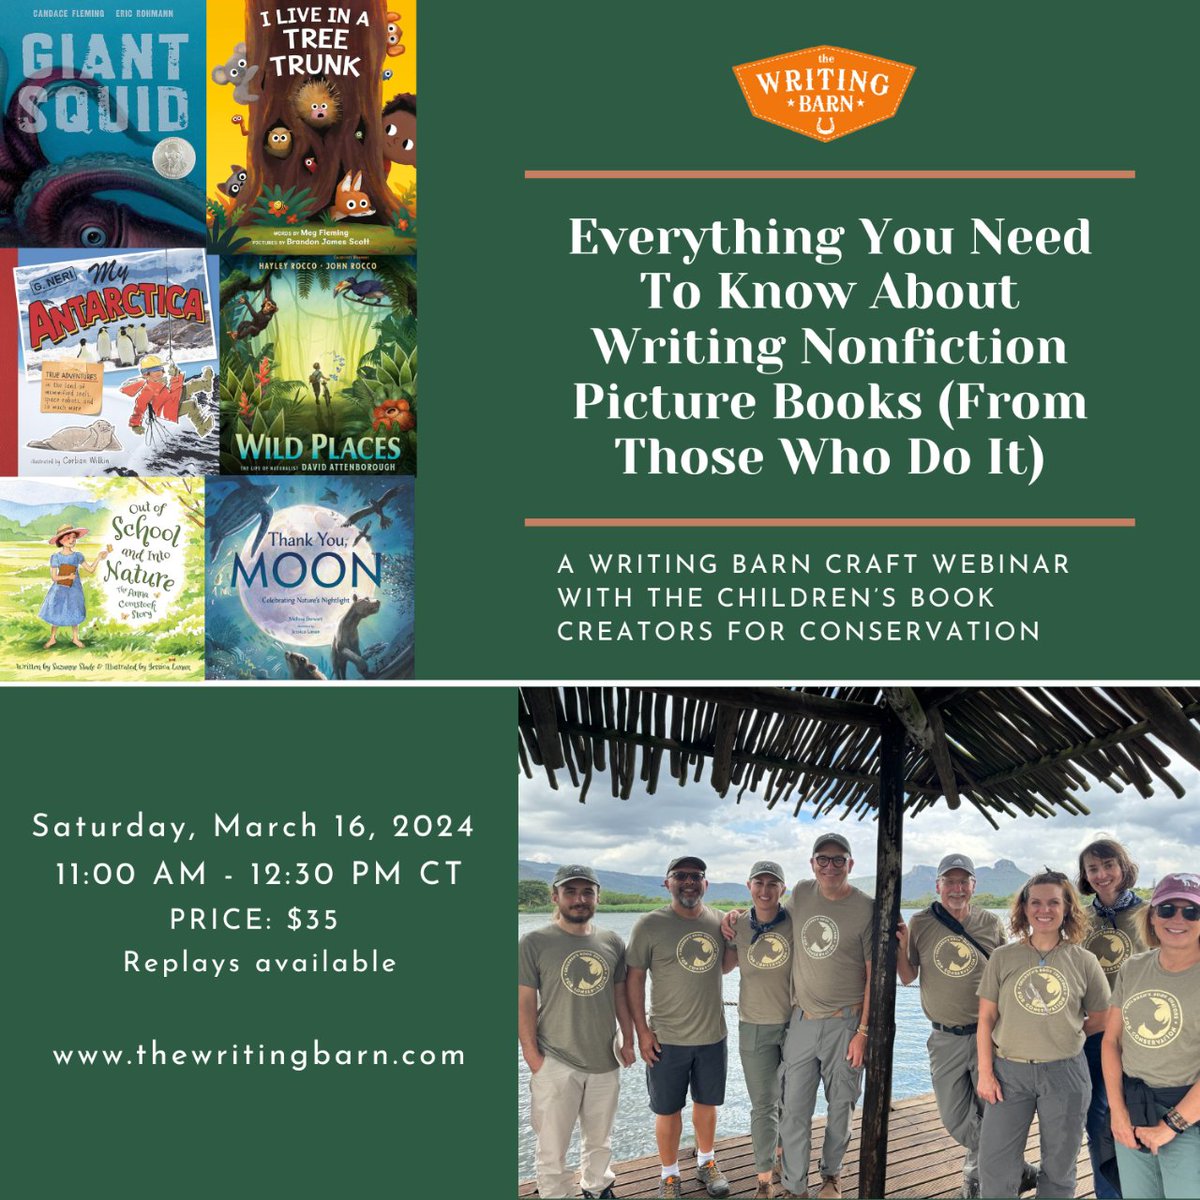 News!! You're invited to join me and the award-winning members of the Children's Book Creators for Conservation for a @TheWritingBarn workshop on nonfiction picture books. 3/16, 11am CT! Sign up here:  courage.thewritingbarn.com/childrens-book…